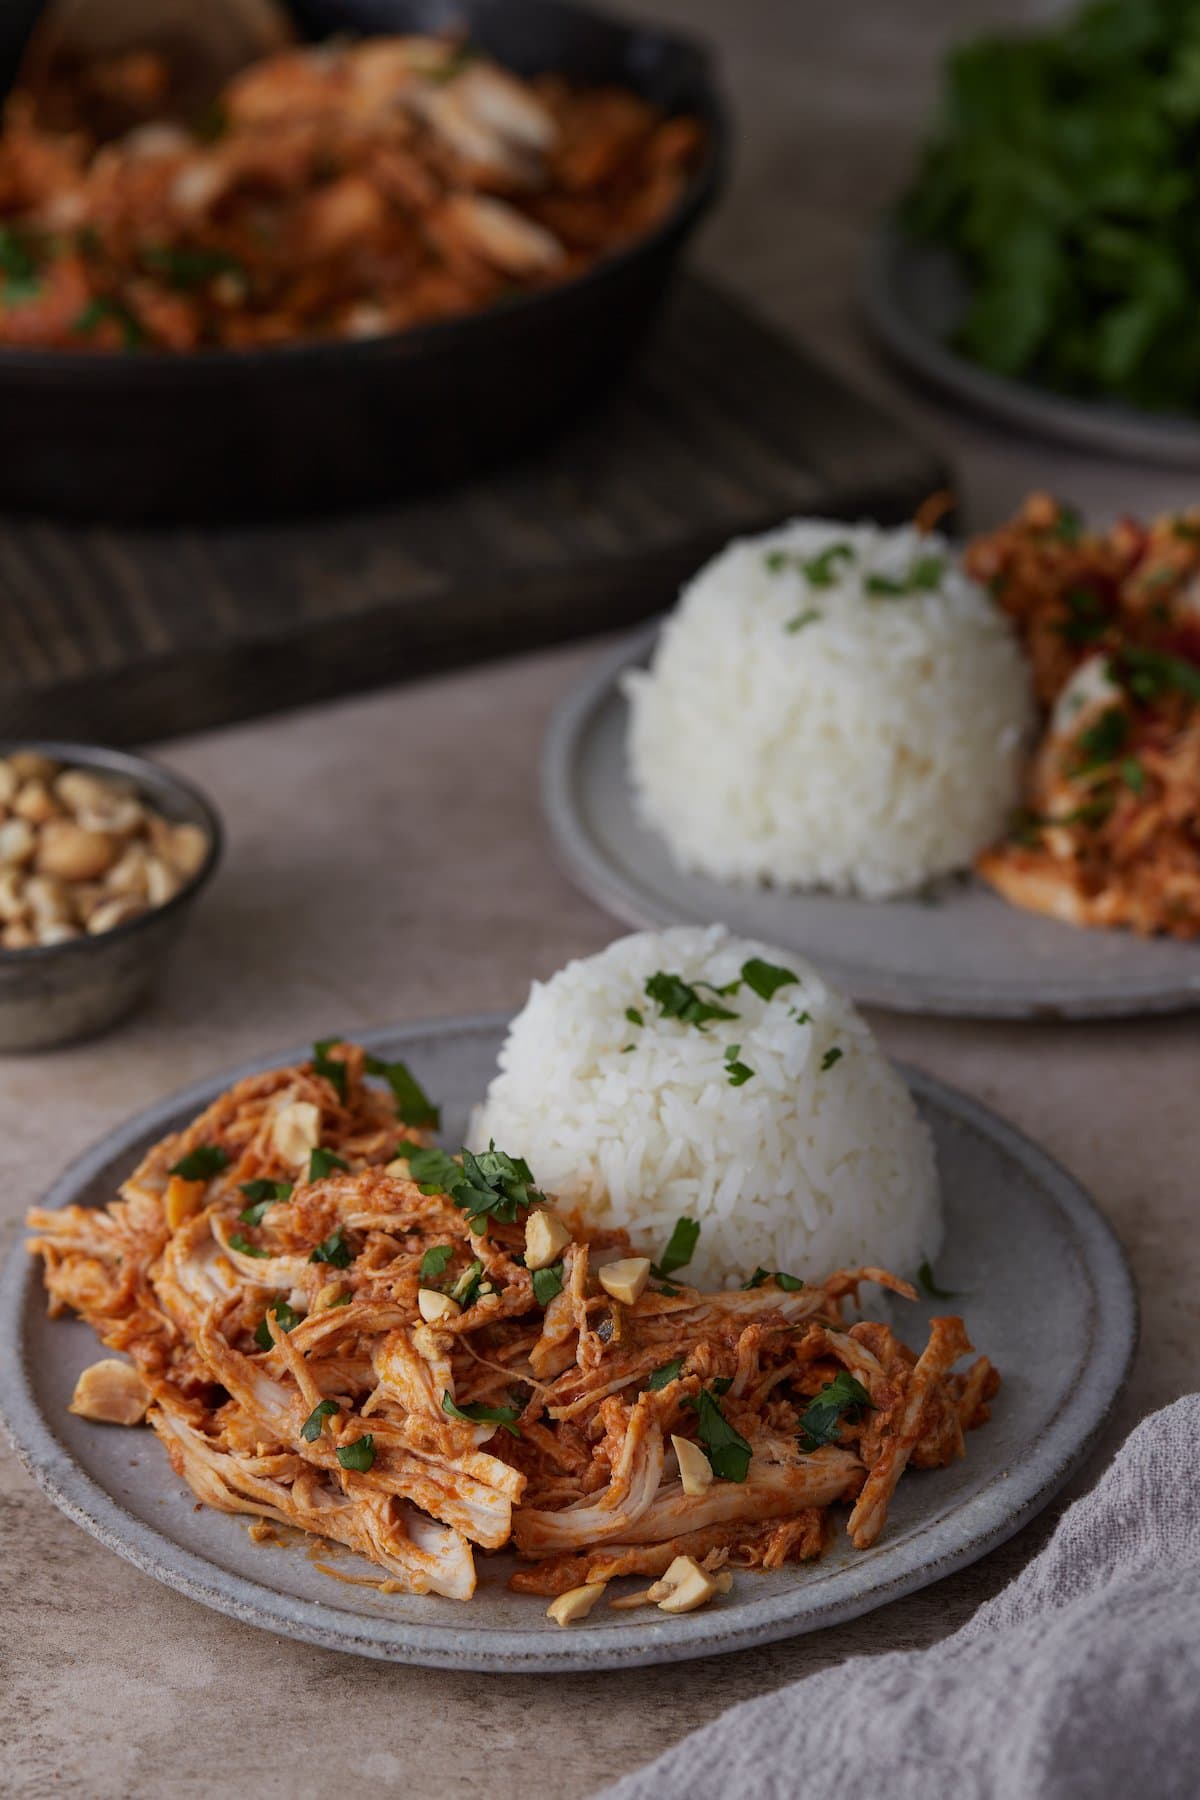 Plates of Thai-style slow cooker chicken and rice.